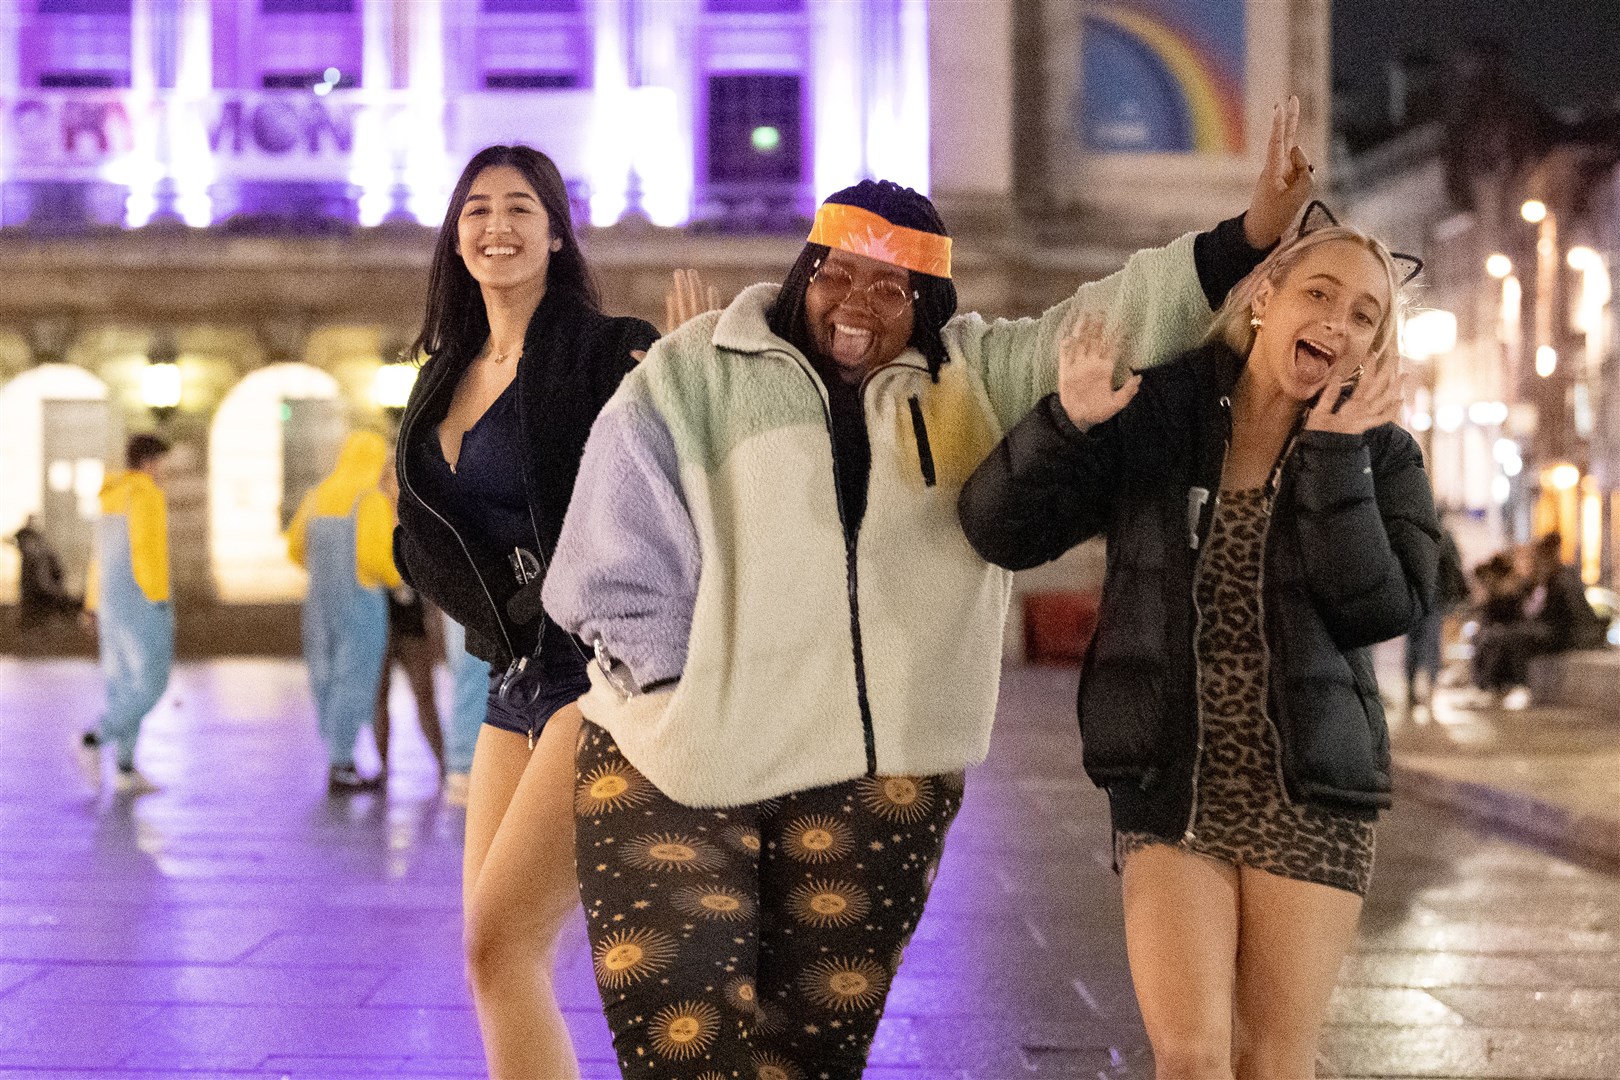 Late-night revellers in Nottingham enjoying themselves on Thursday, shortly before Tier 3 measures came into force. (Joe Giddens/PA)